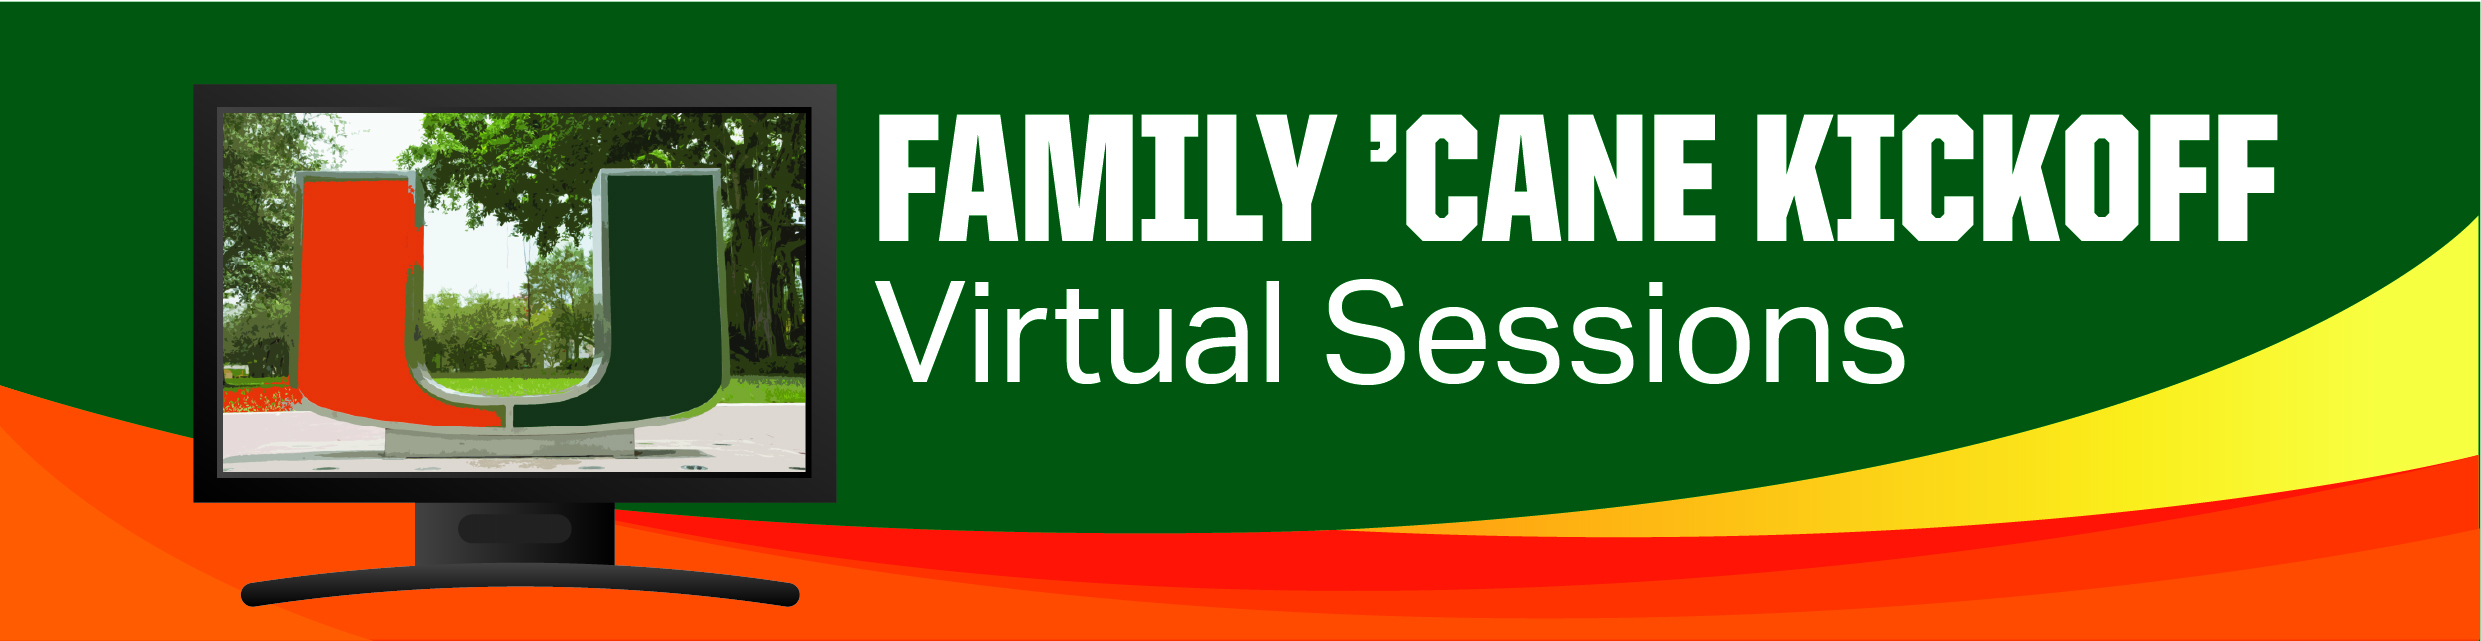 text: "Family Cane Kickoff Virtual Sessions" with image of Computer with U statue background in front of Cane Kickoff color scheme